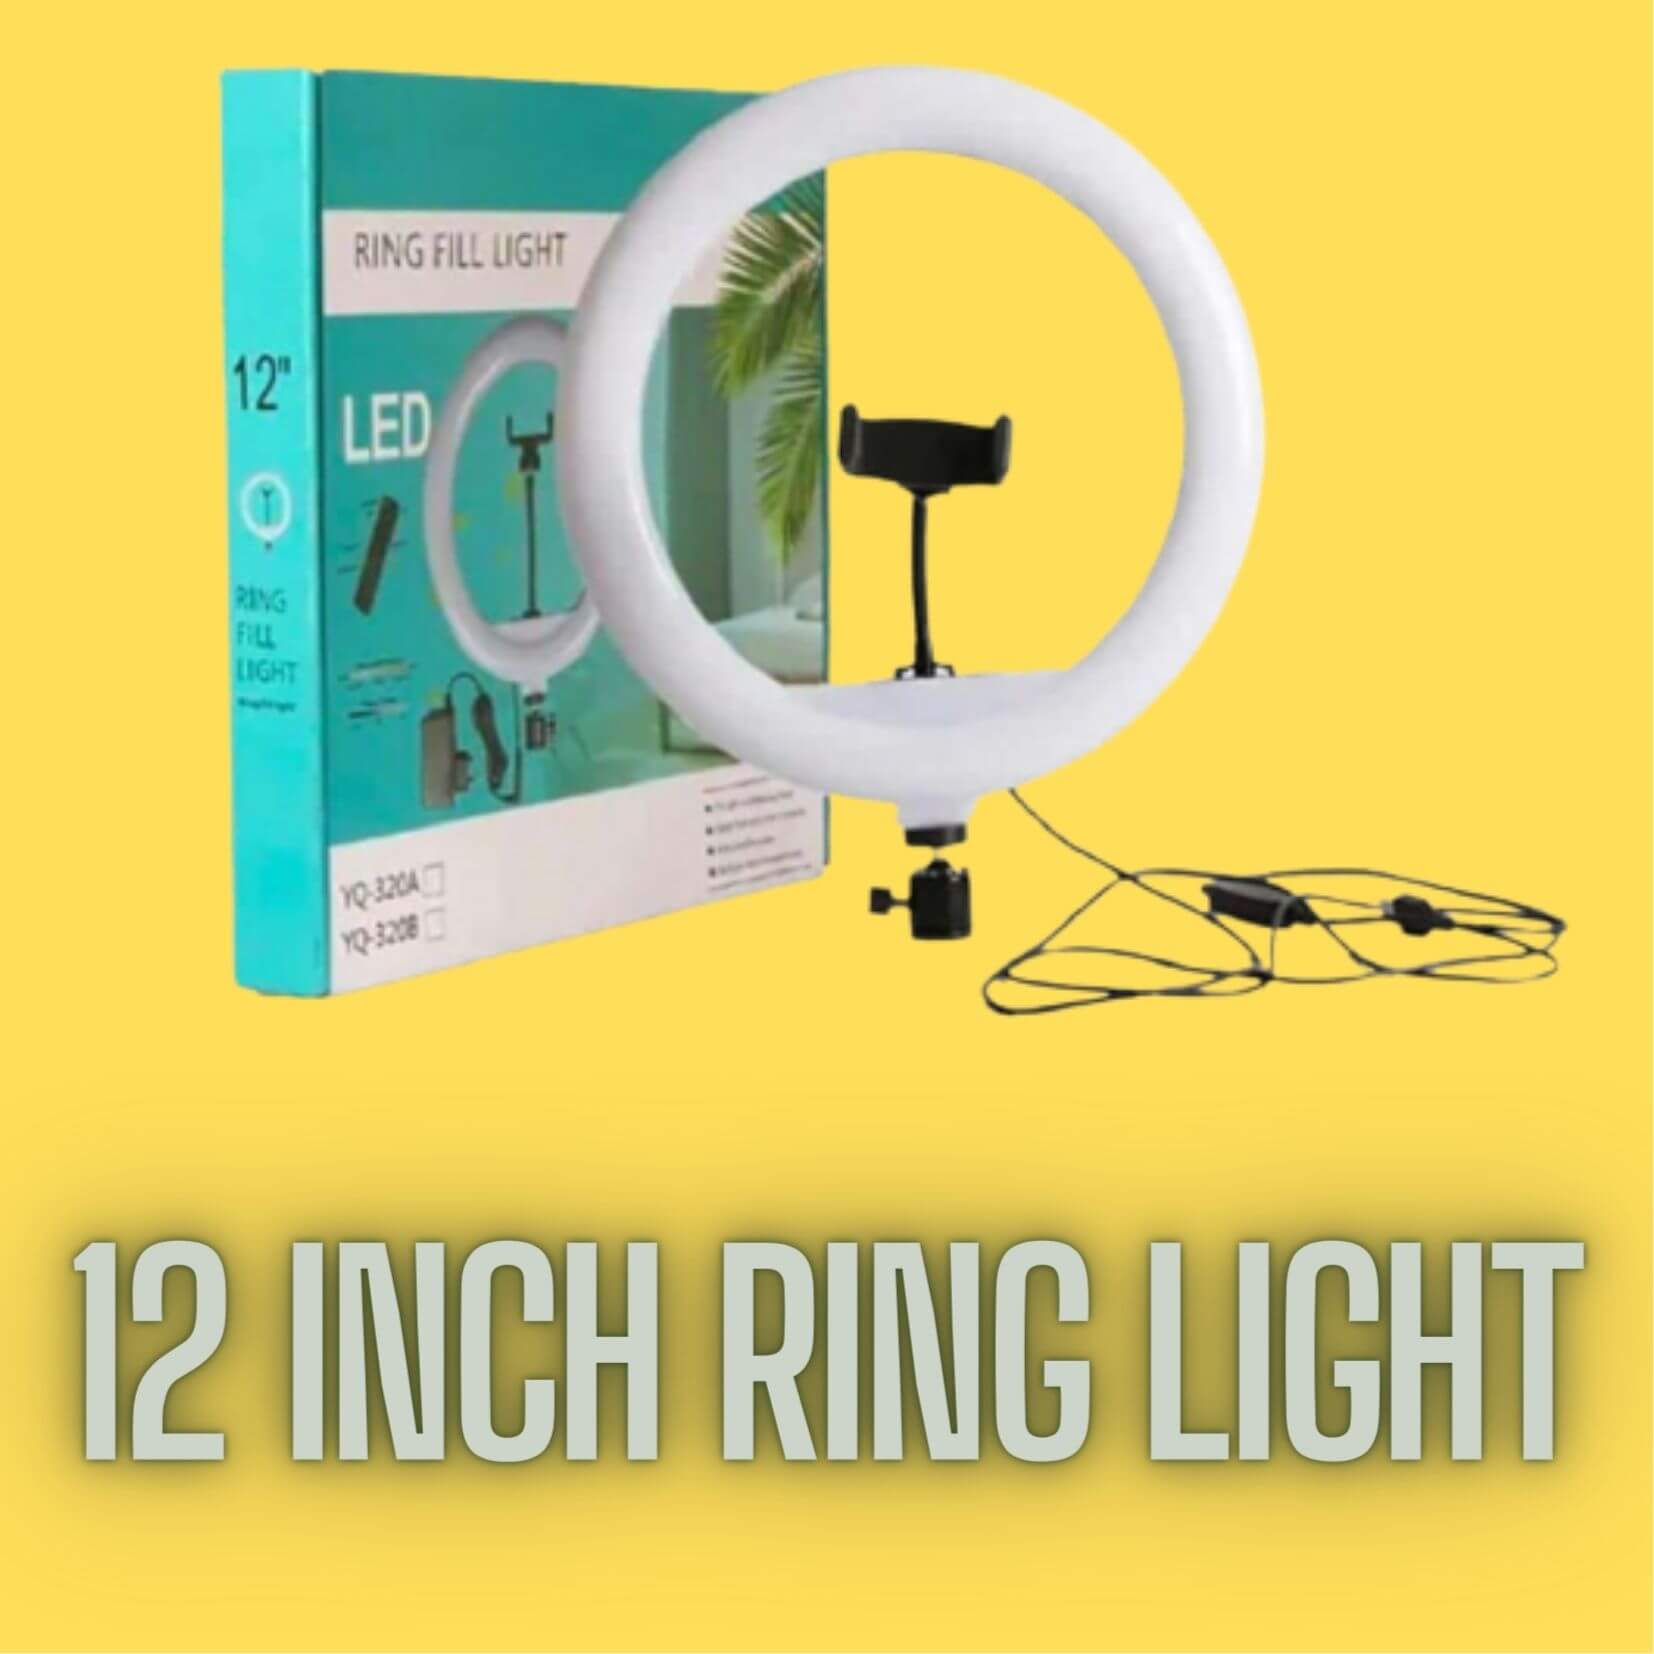 What is a Ring Light & Why Should I Use It? | Spectrum